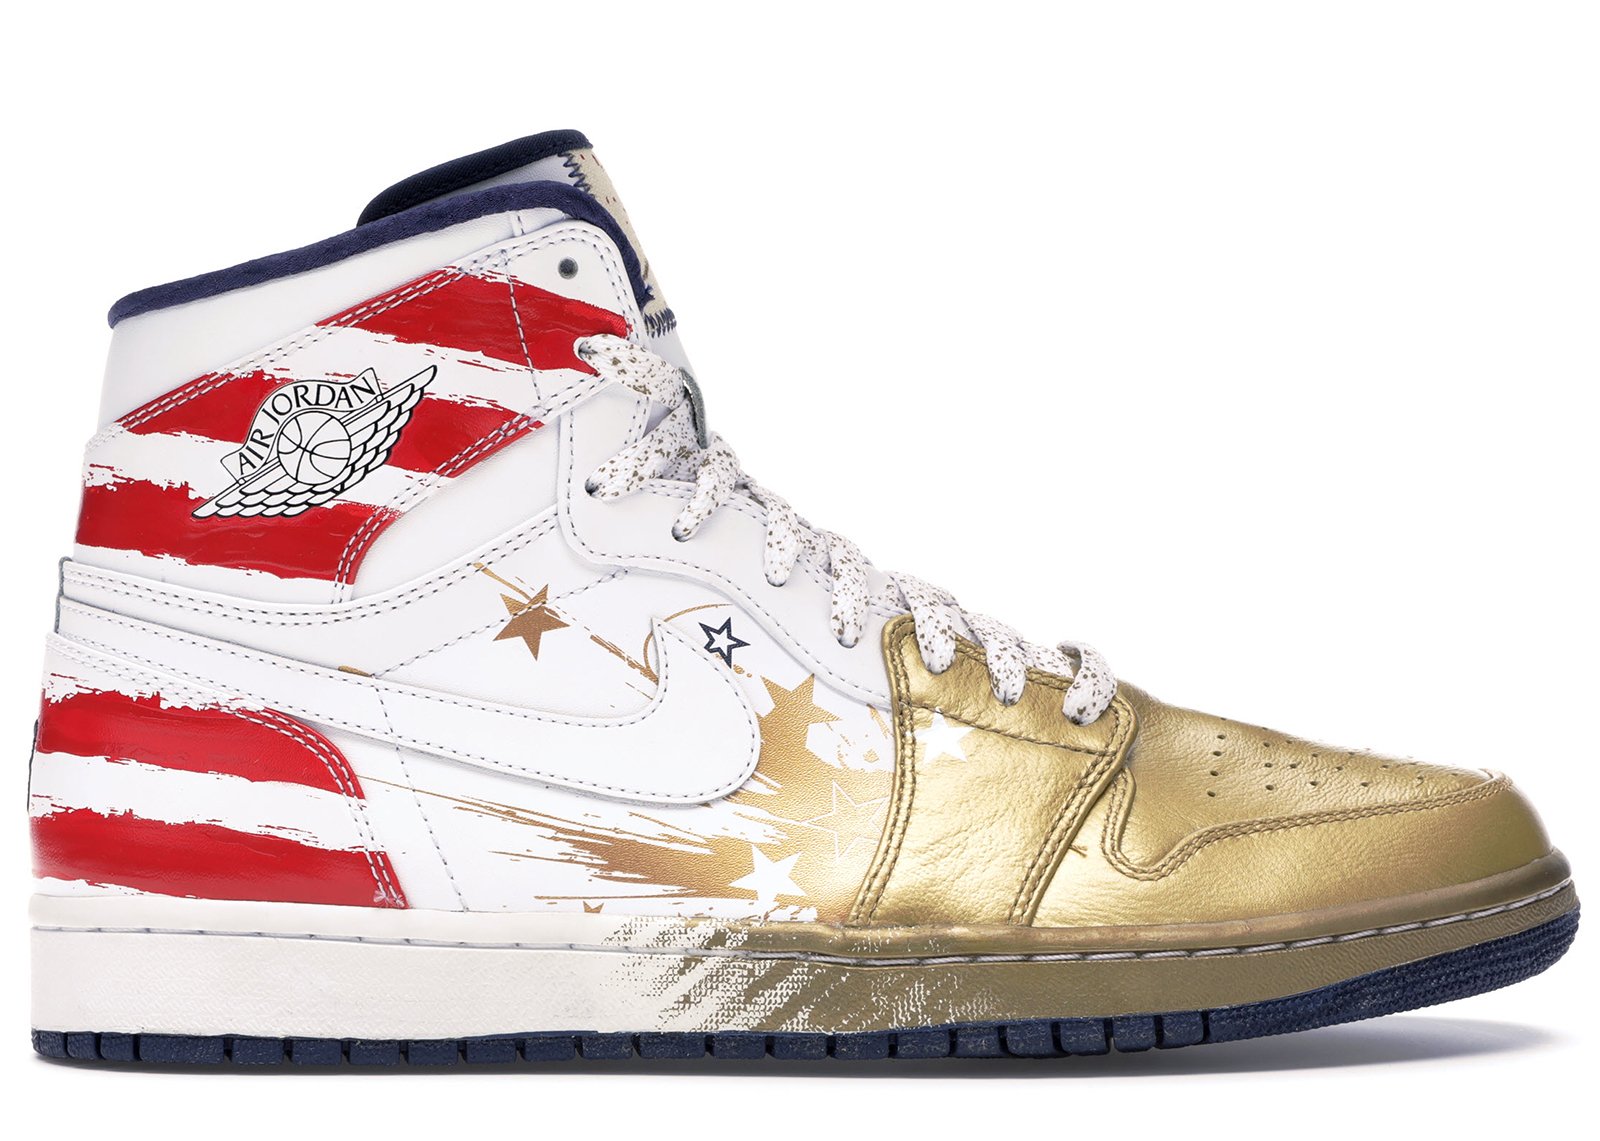 Jordan 1 Retro Dave White Wings For the Future Gold sneaker informations